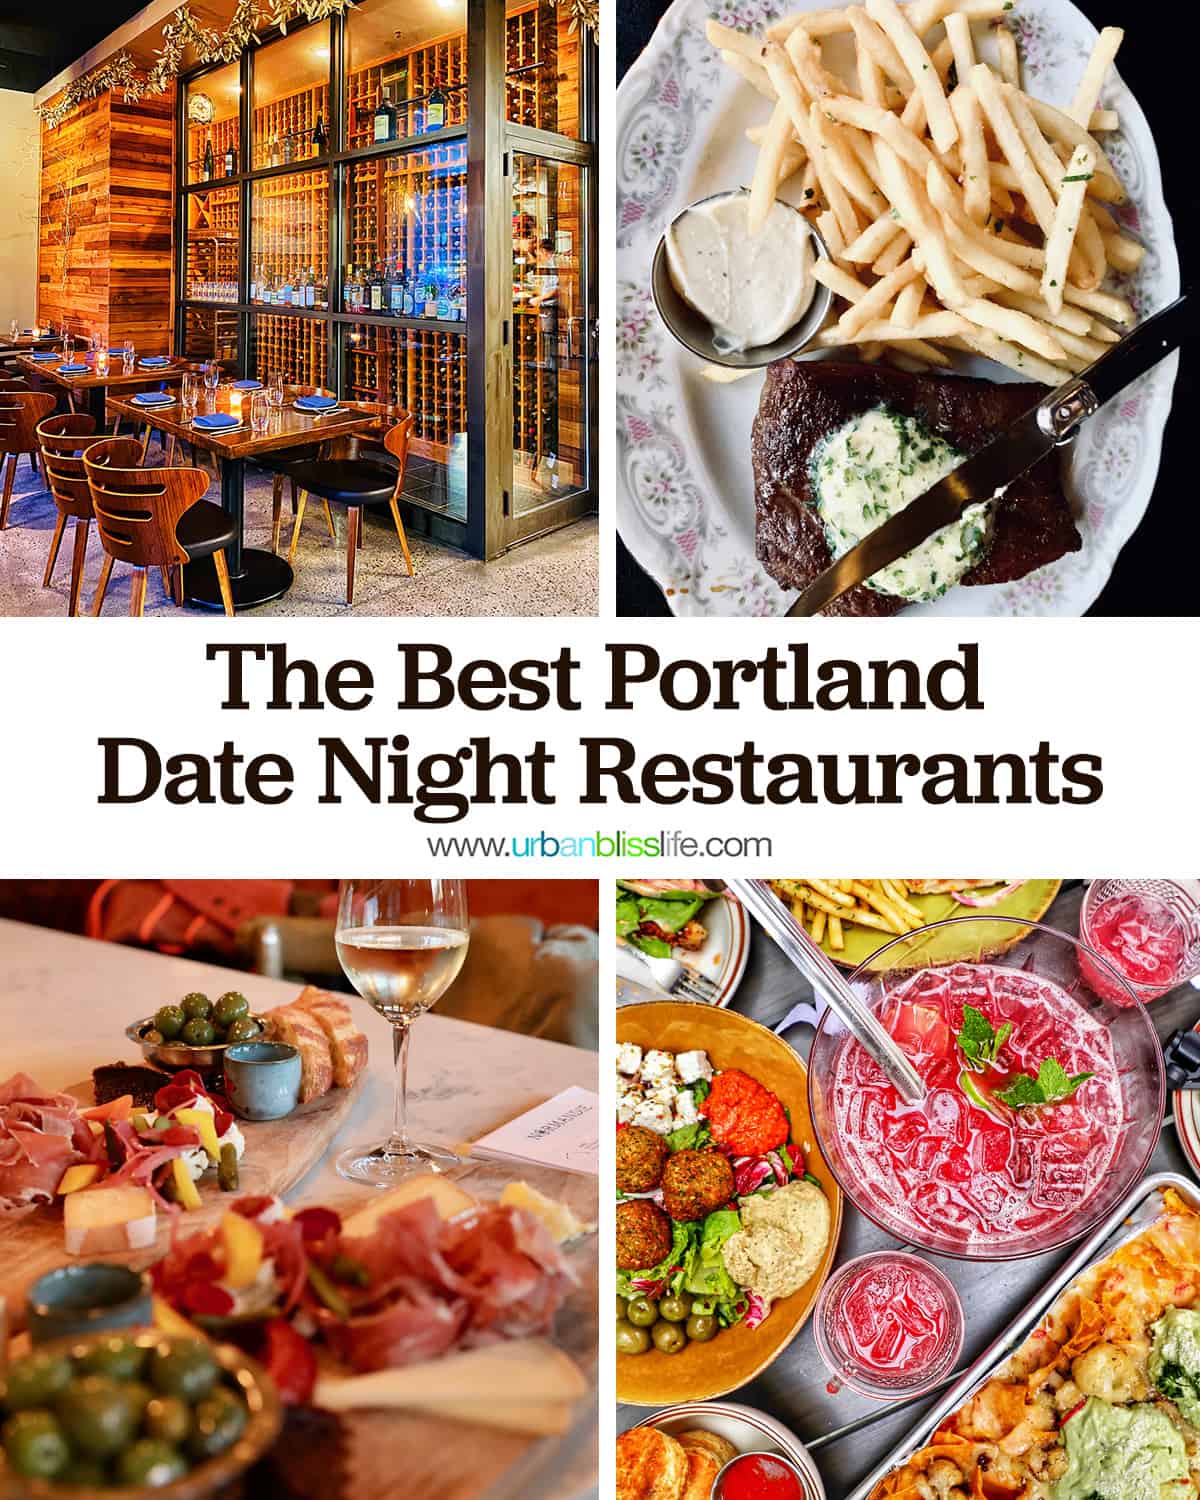 four photos of a wine cellar with glass walls, steak frites, party punch, wine and charcuterie with text that reads "The Best Portland Date Night Restaurants."